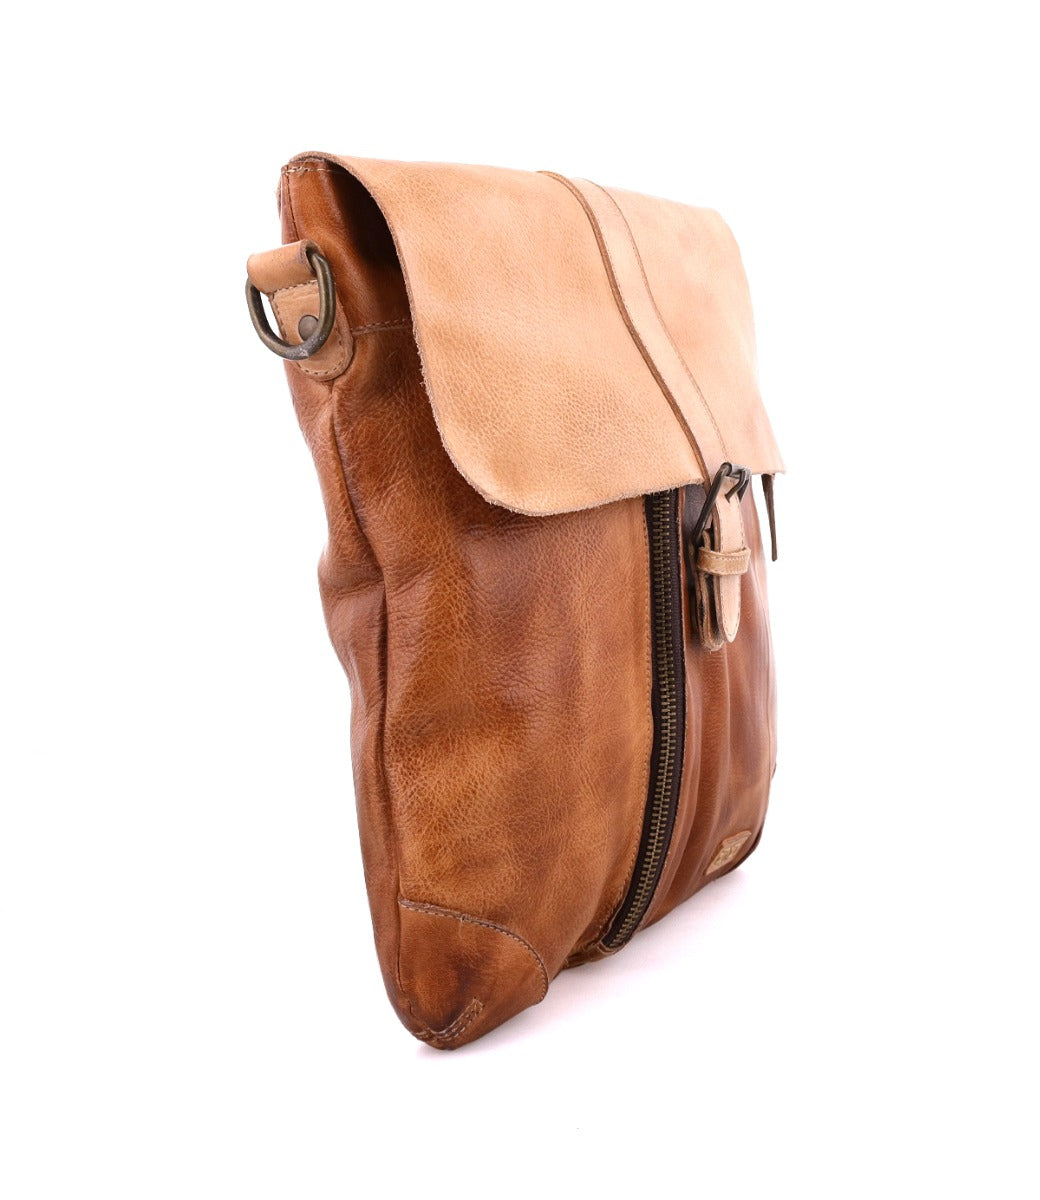 A Jack leather crossbody bag with a zipper, made by Bed Stu.